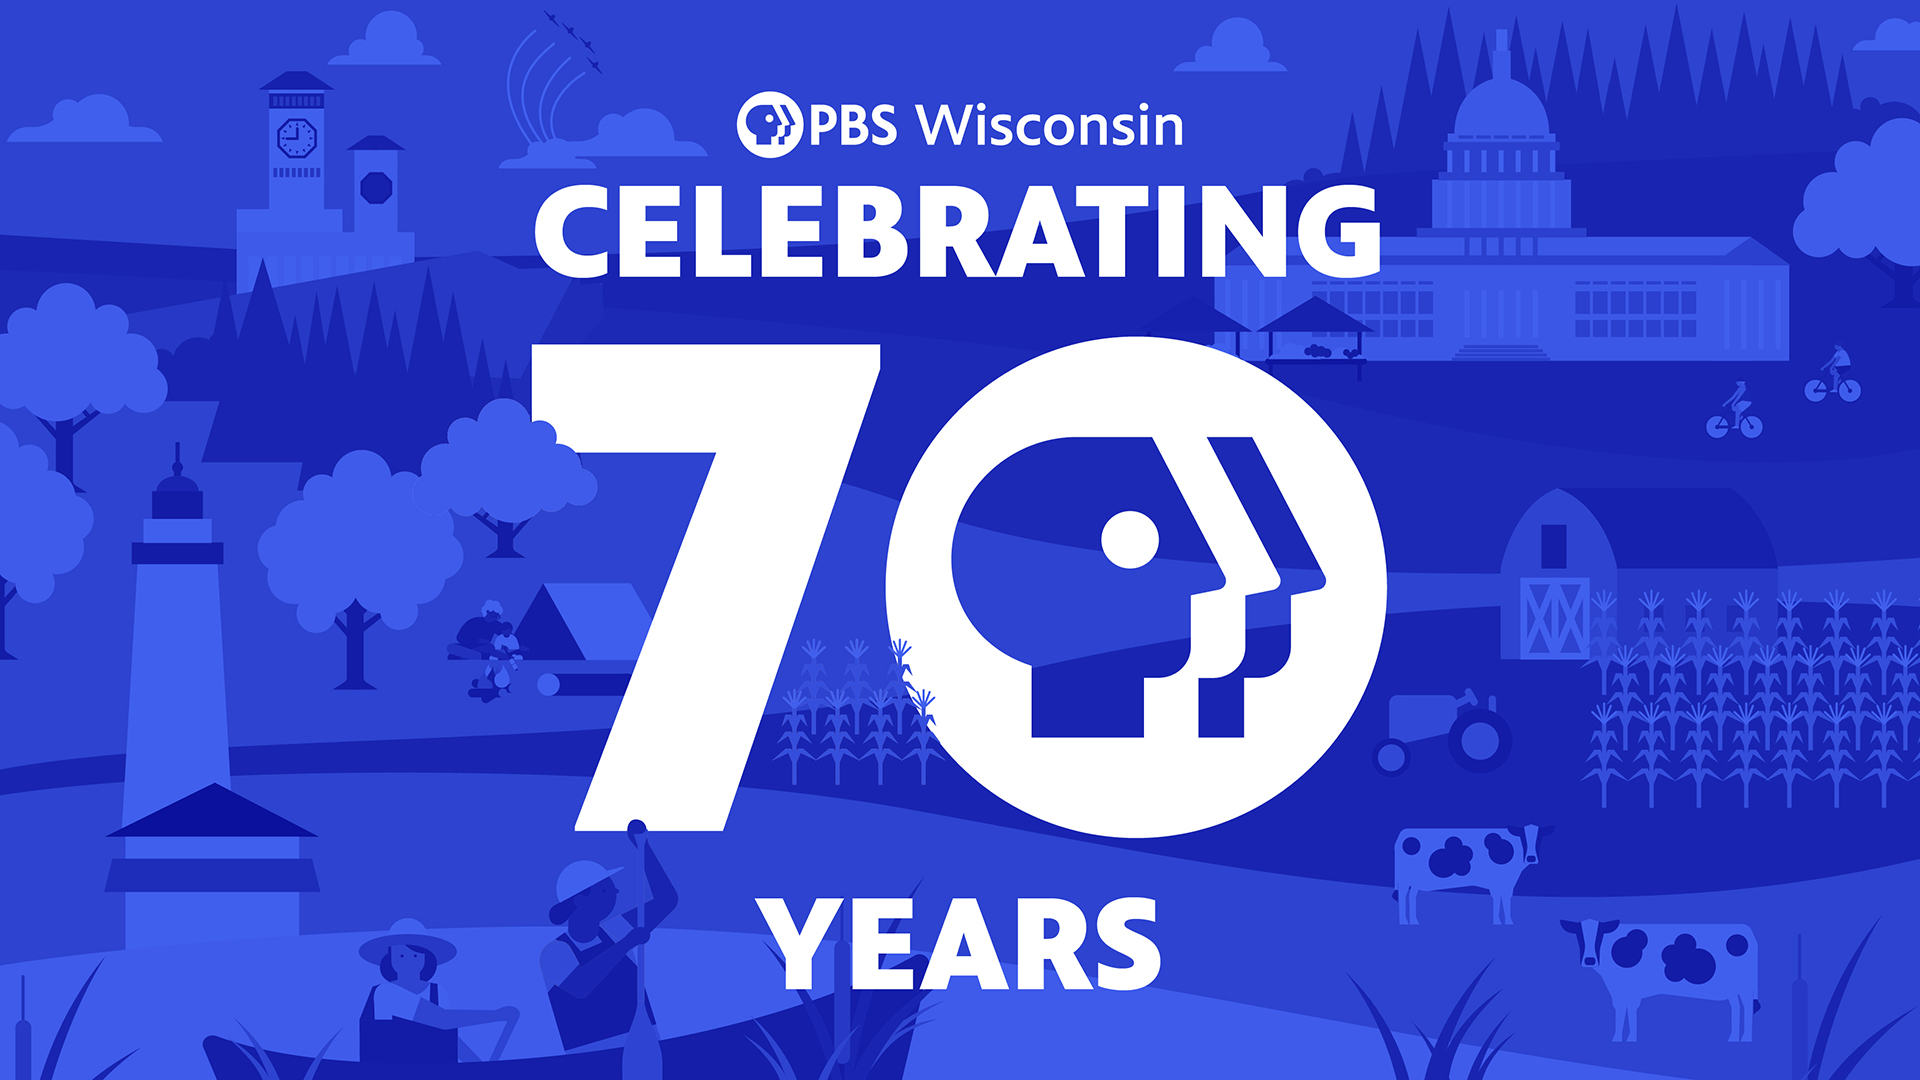 The PBS Wisconsin logo above "Celebrating 70 years" on a blue background of illustrated images that depict the charm and character of Wisconsin.